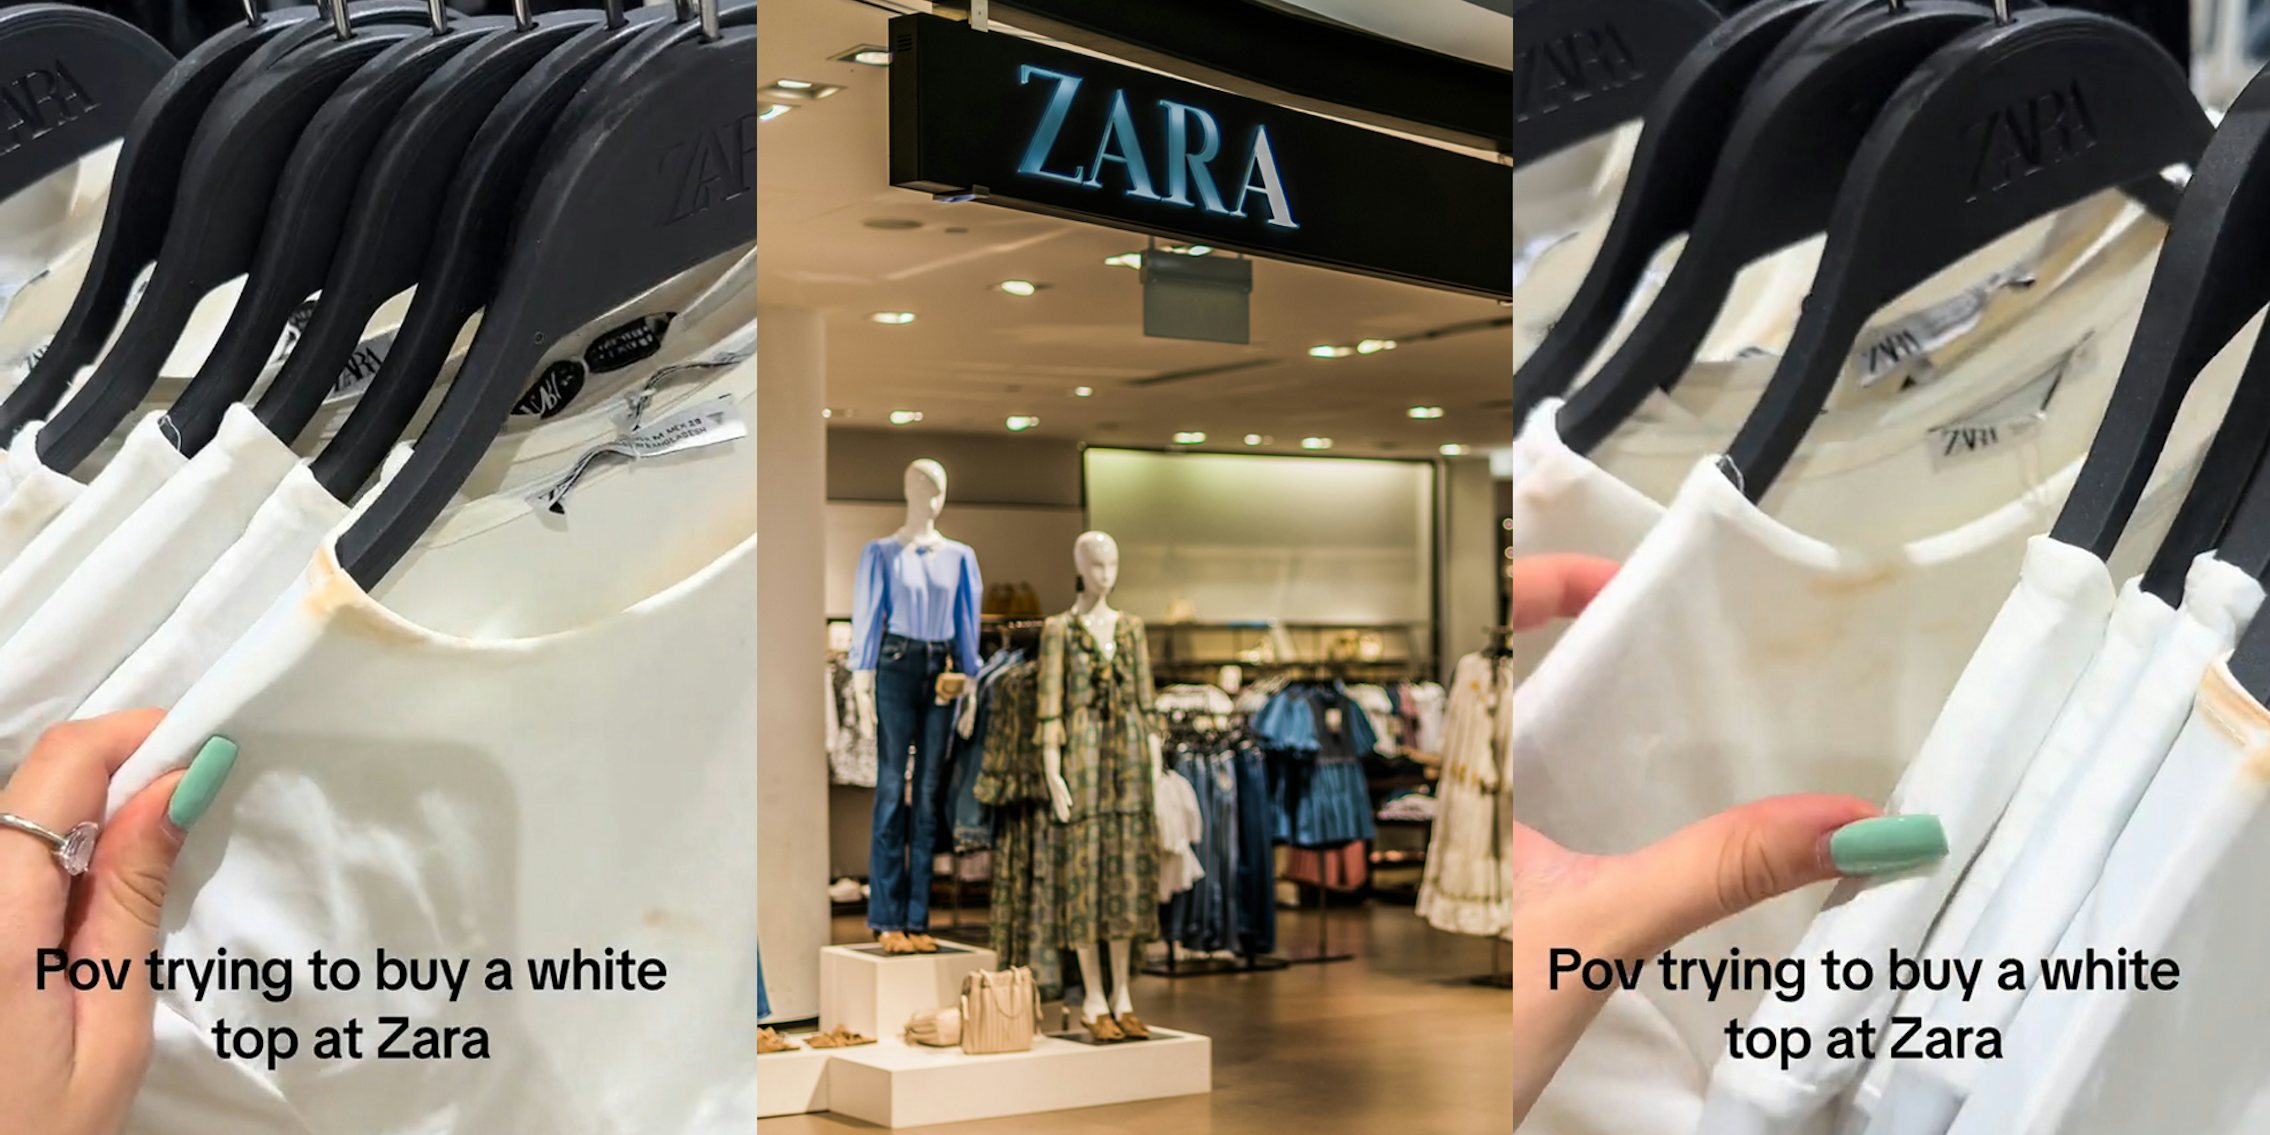 Zara shopper sifting through white shirts on rack with caption 'Pov trying to buy a white top at Zara' (l) Zara store interior with sign (c) Zara shopper sifting through white shirts on rack with caption 'Pov trying to buy a white top at Zara' (r)